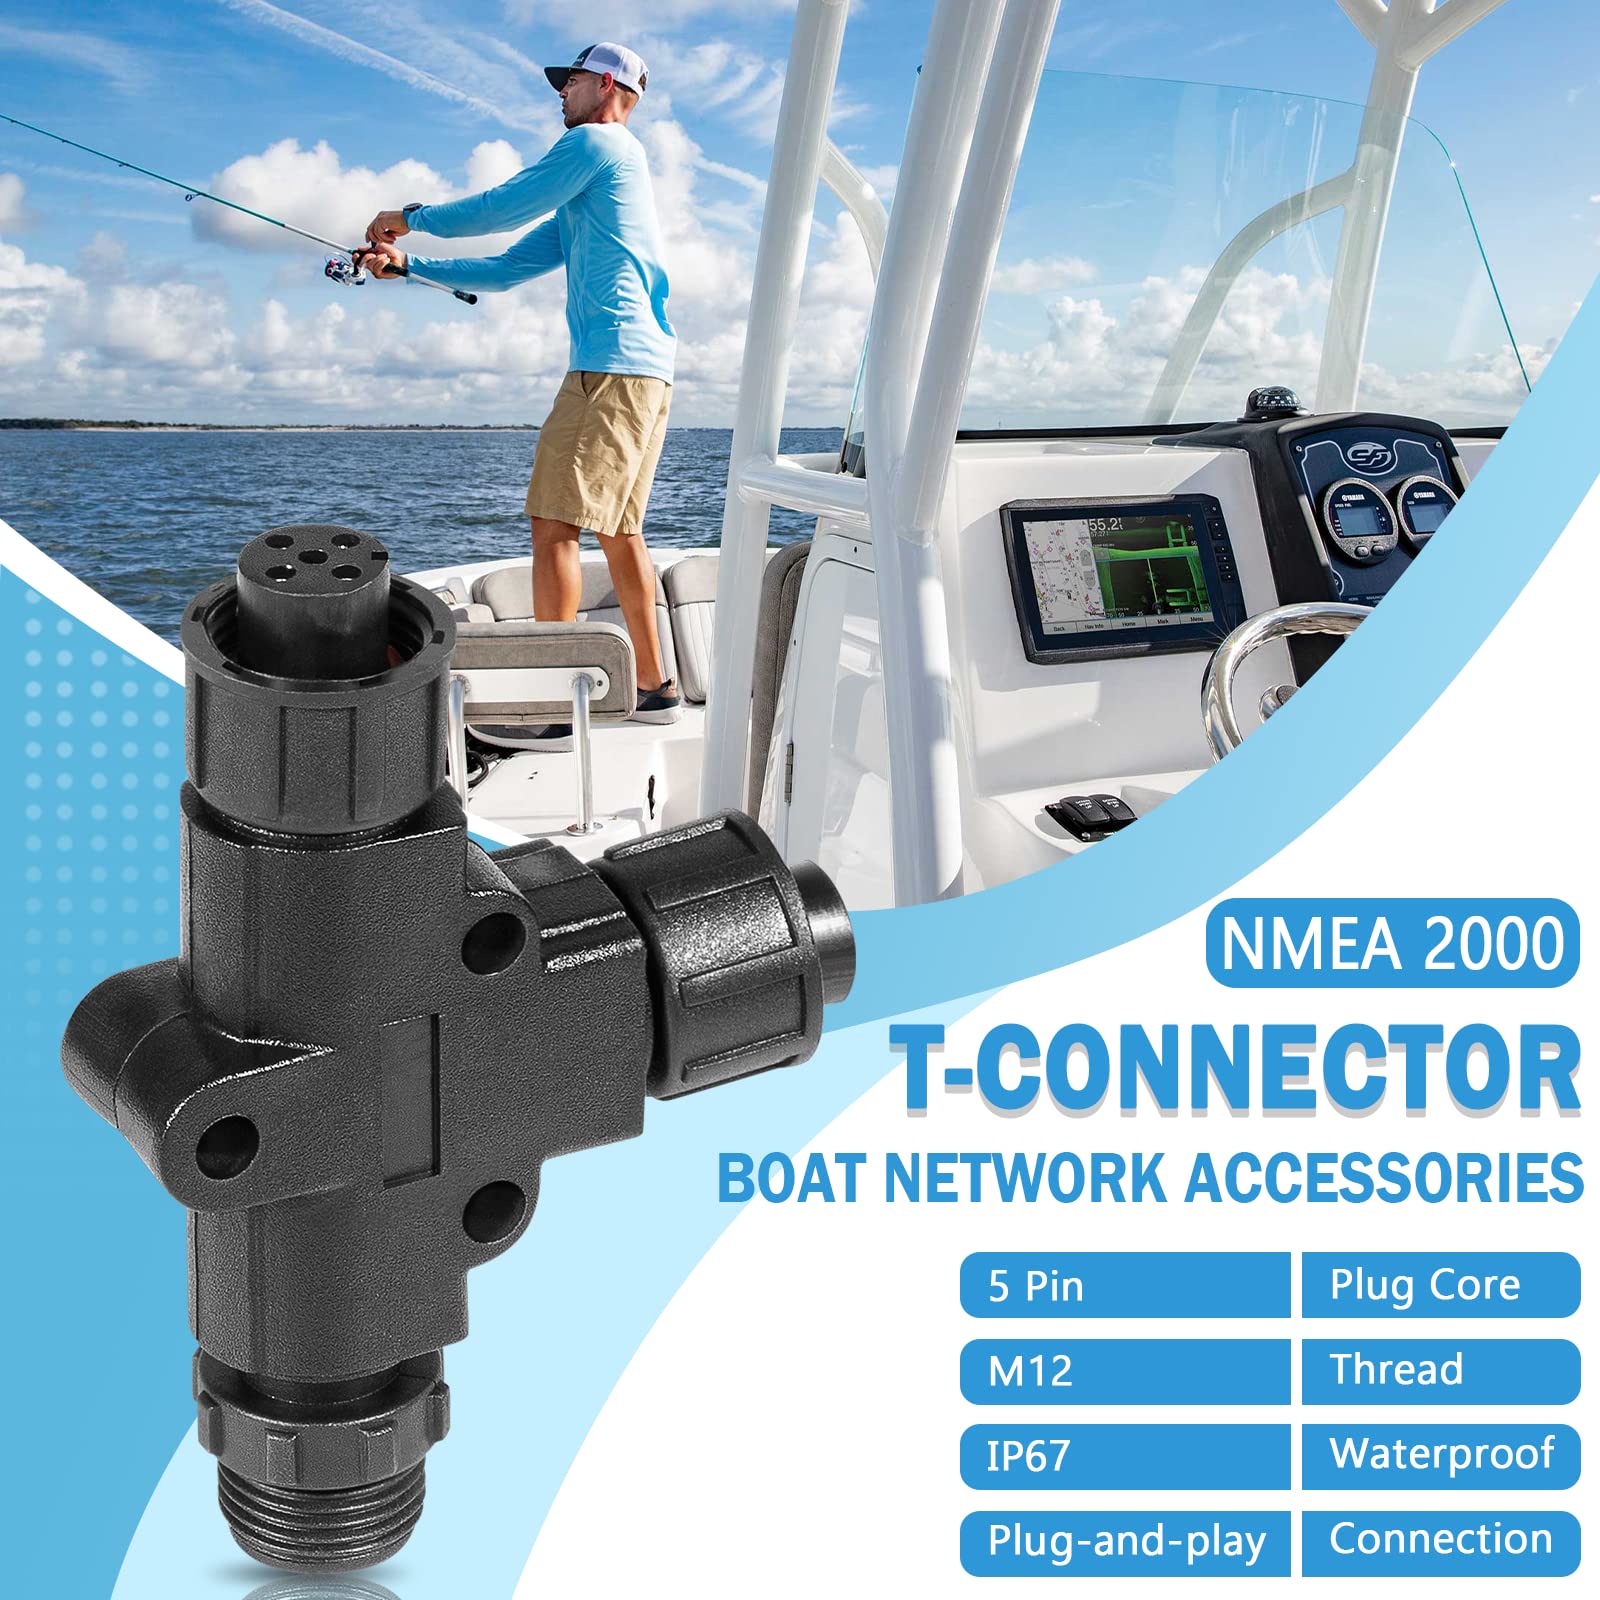 NMEA 2000 (N2k) (Tee) T-Connector Boat Accessories for Garmin Lowrance Simrad B&G Navico Networks, IP67 Waterproof, Stable Connection (2 Pack)